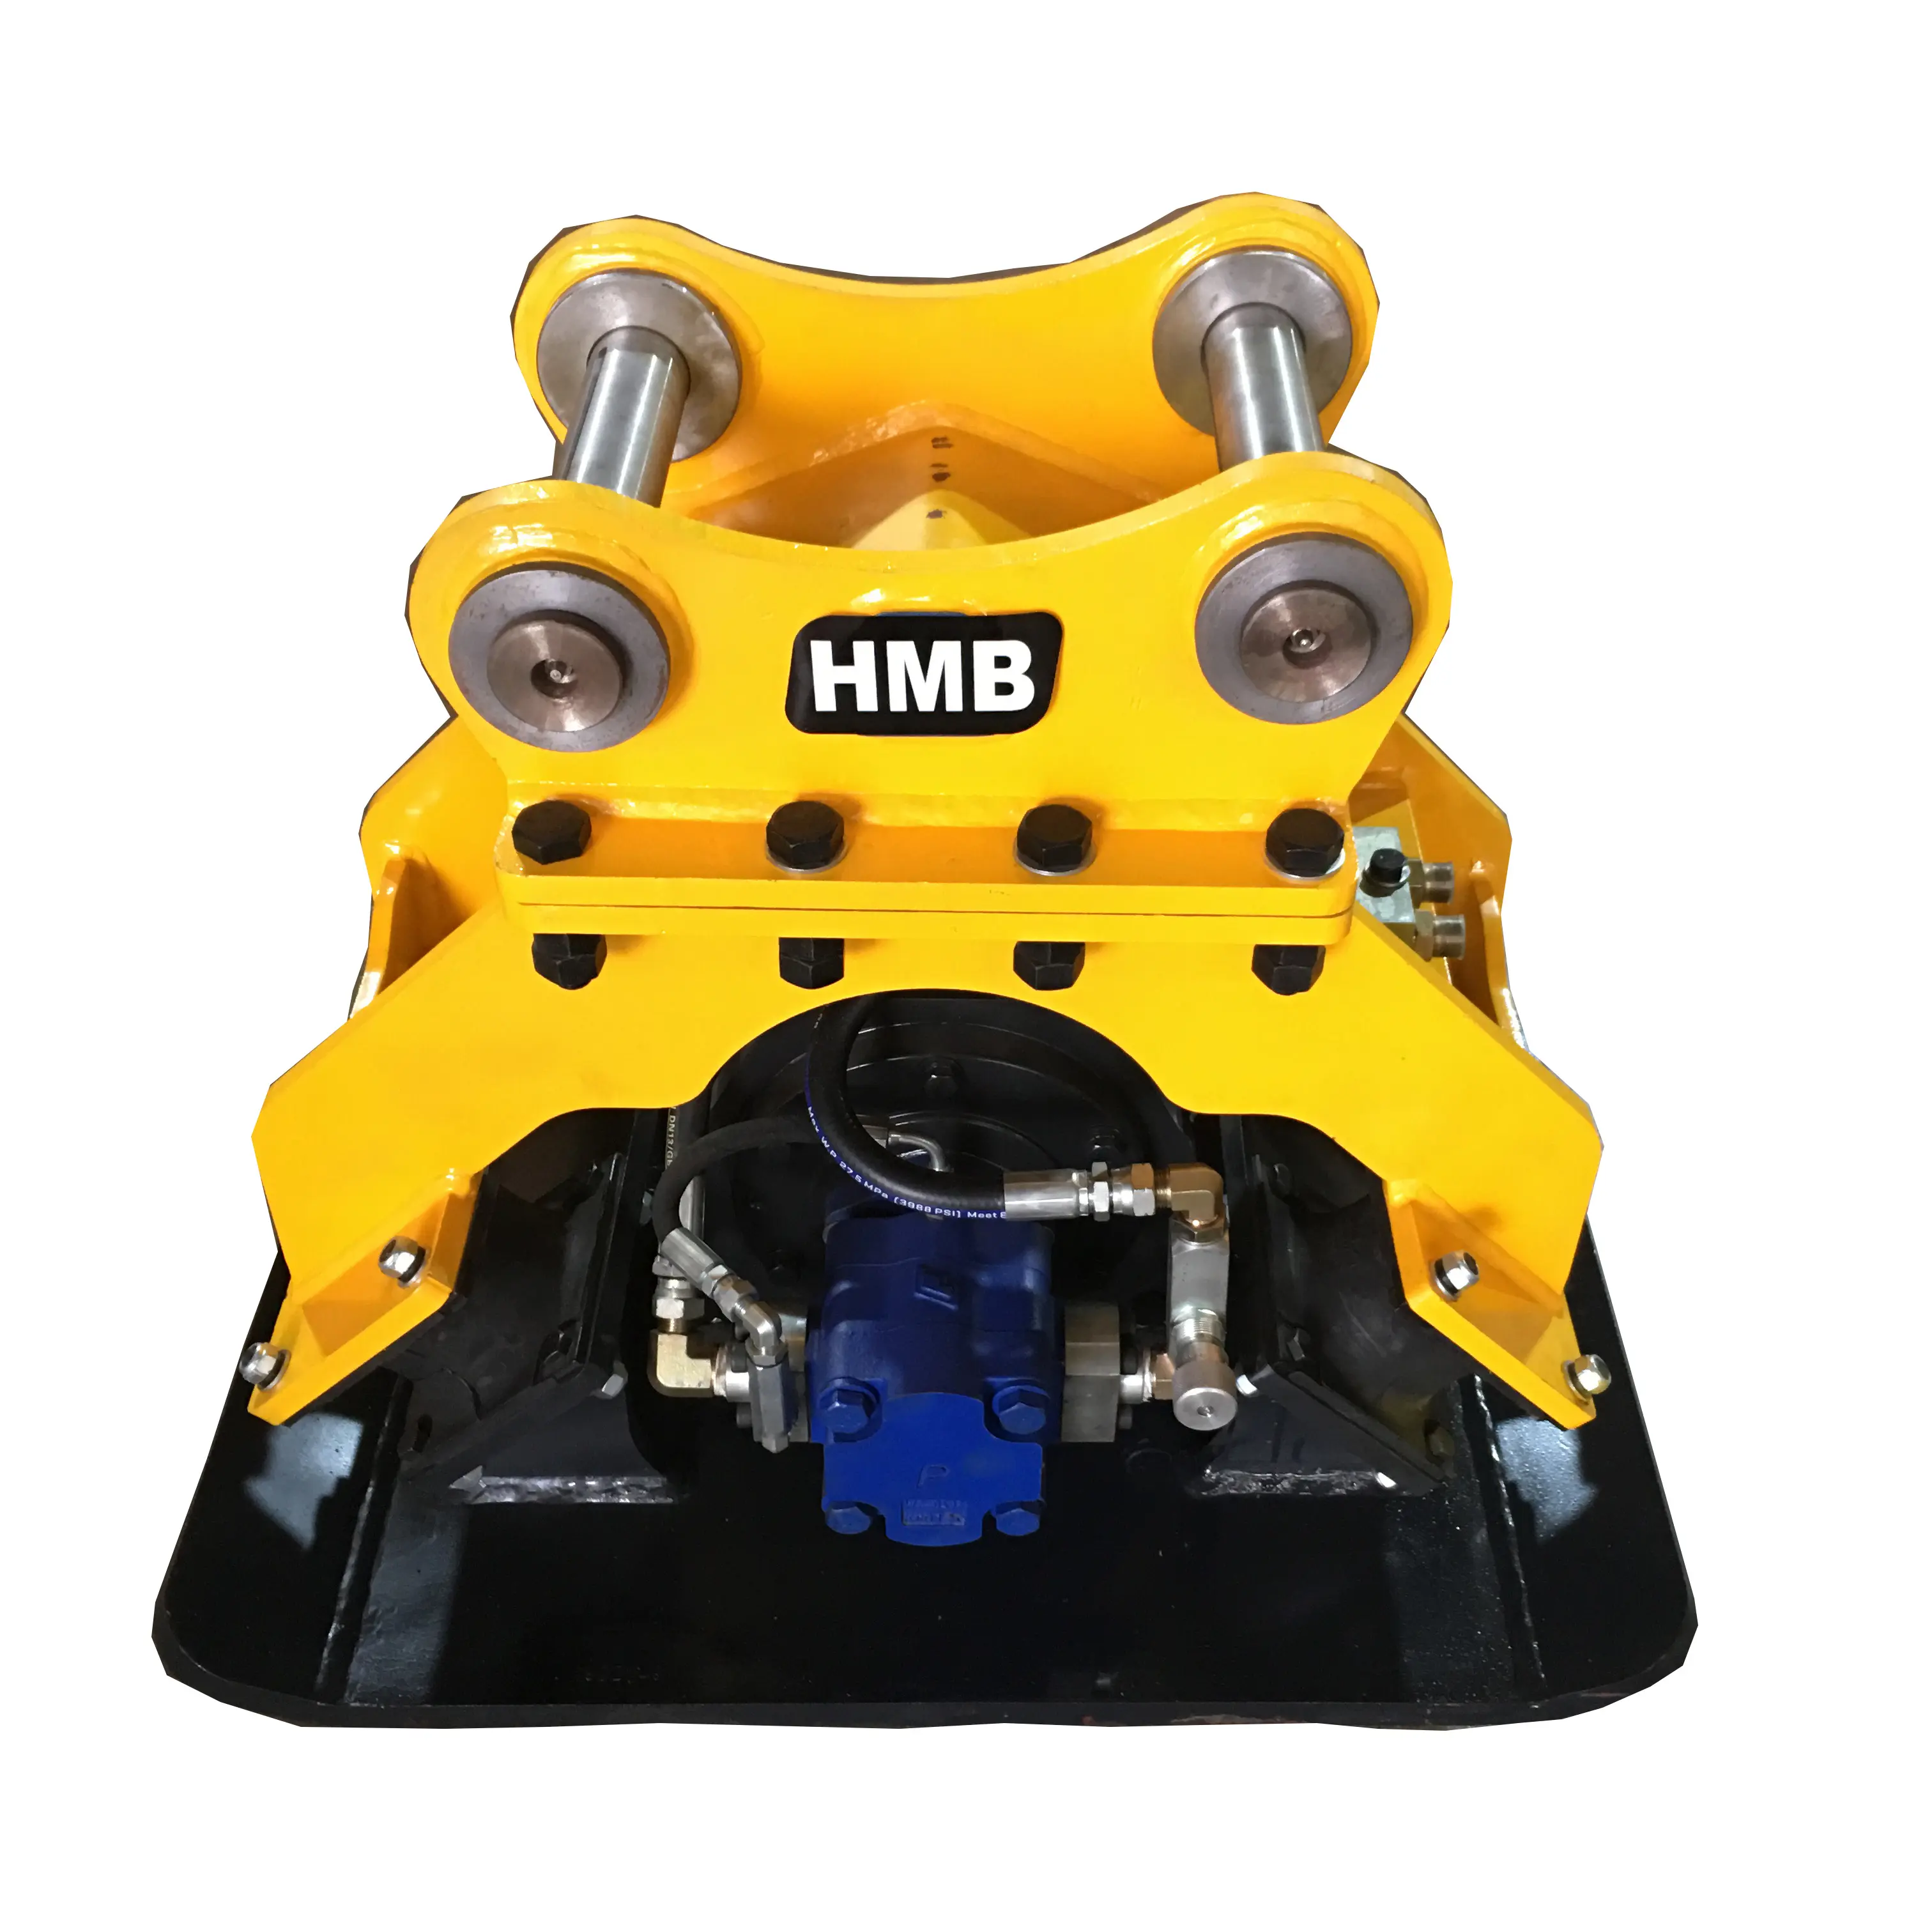 Hydraulic compactor mini plate compactor for road construction